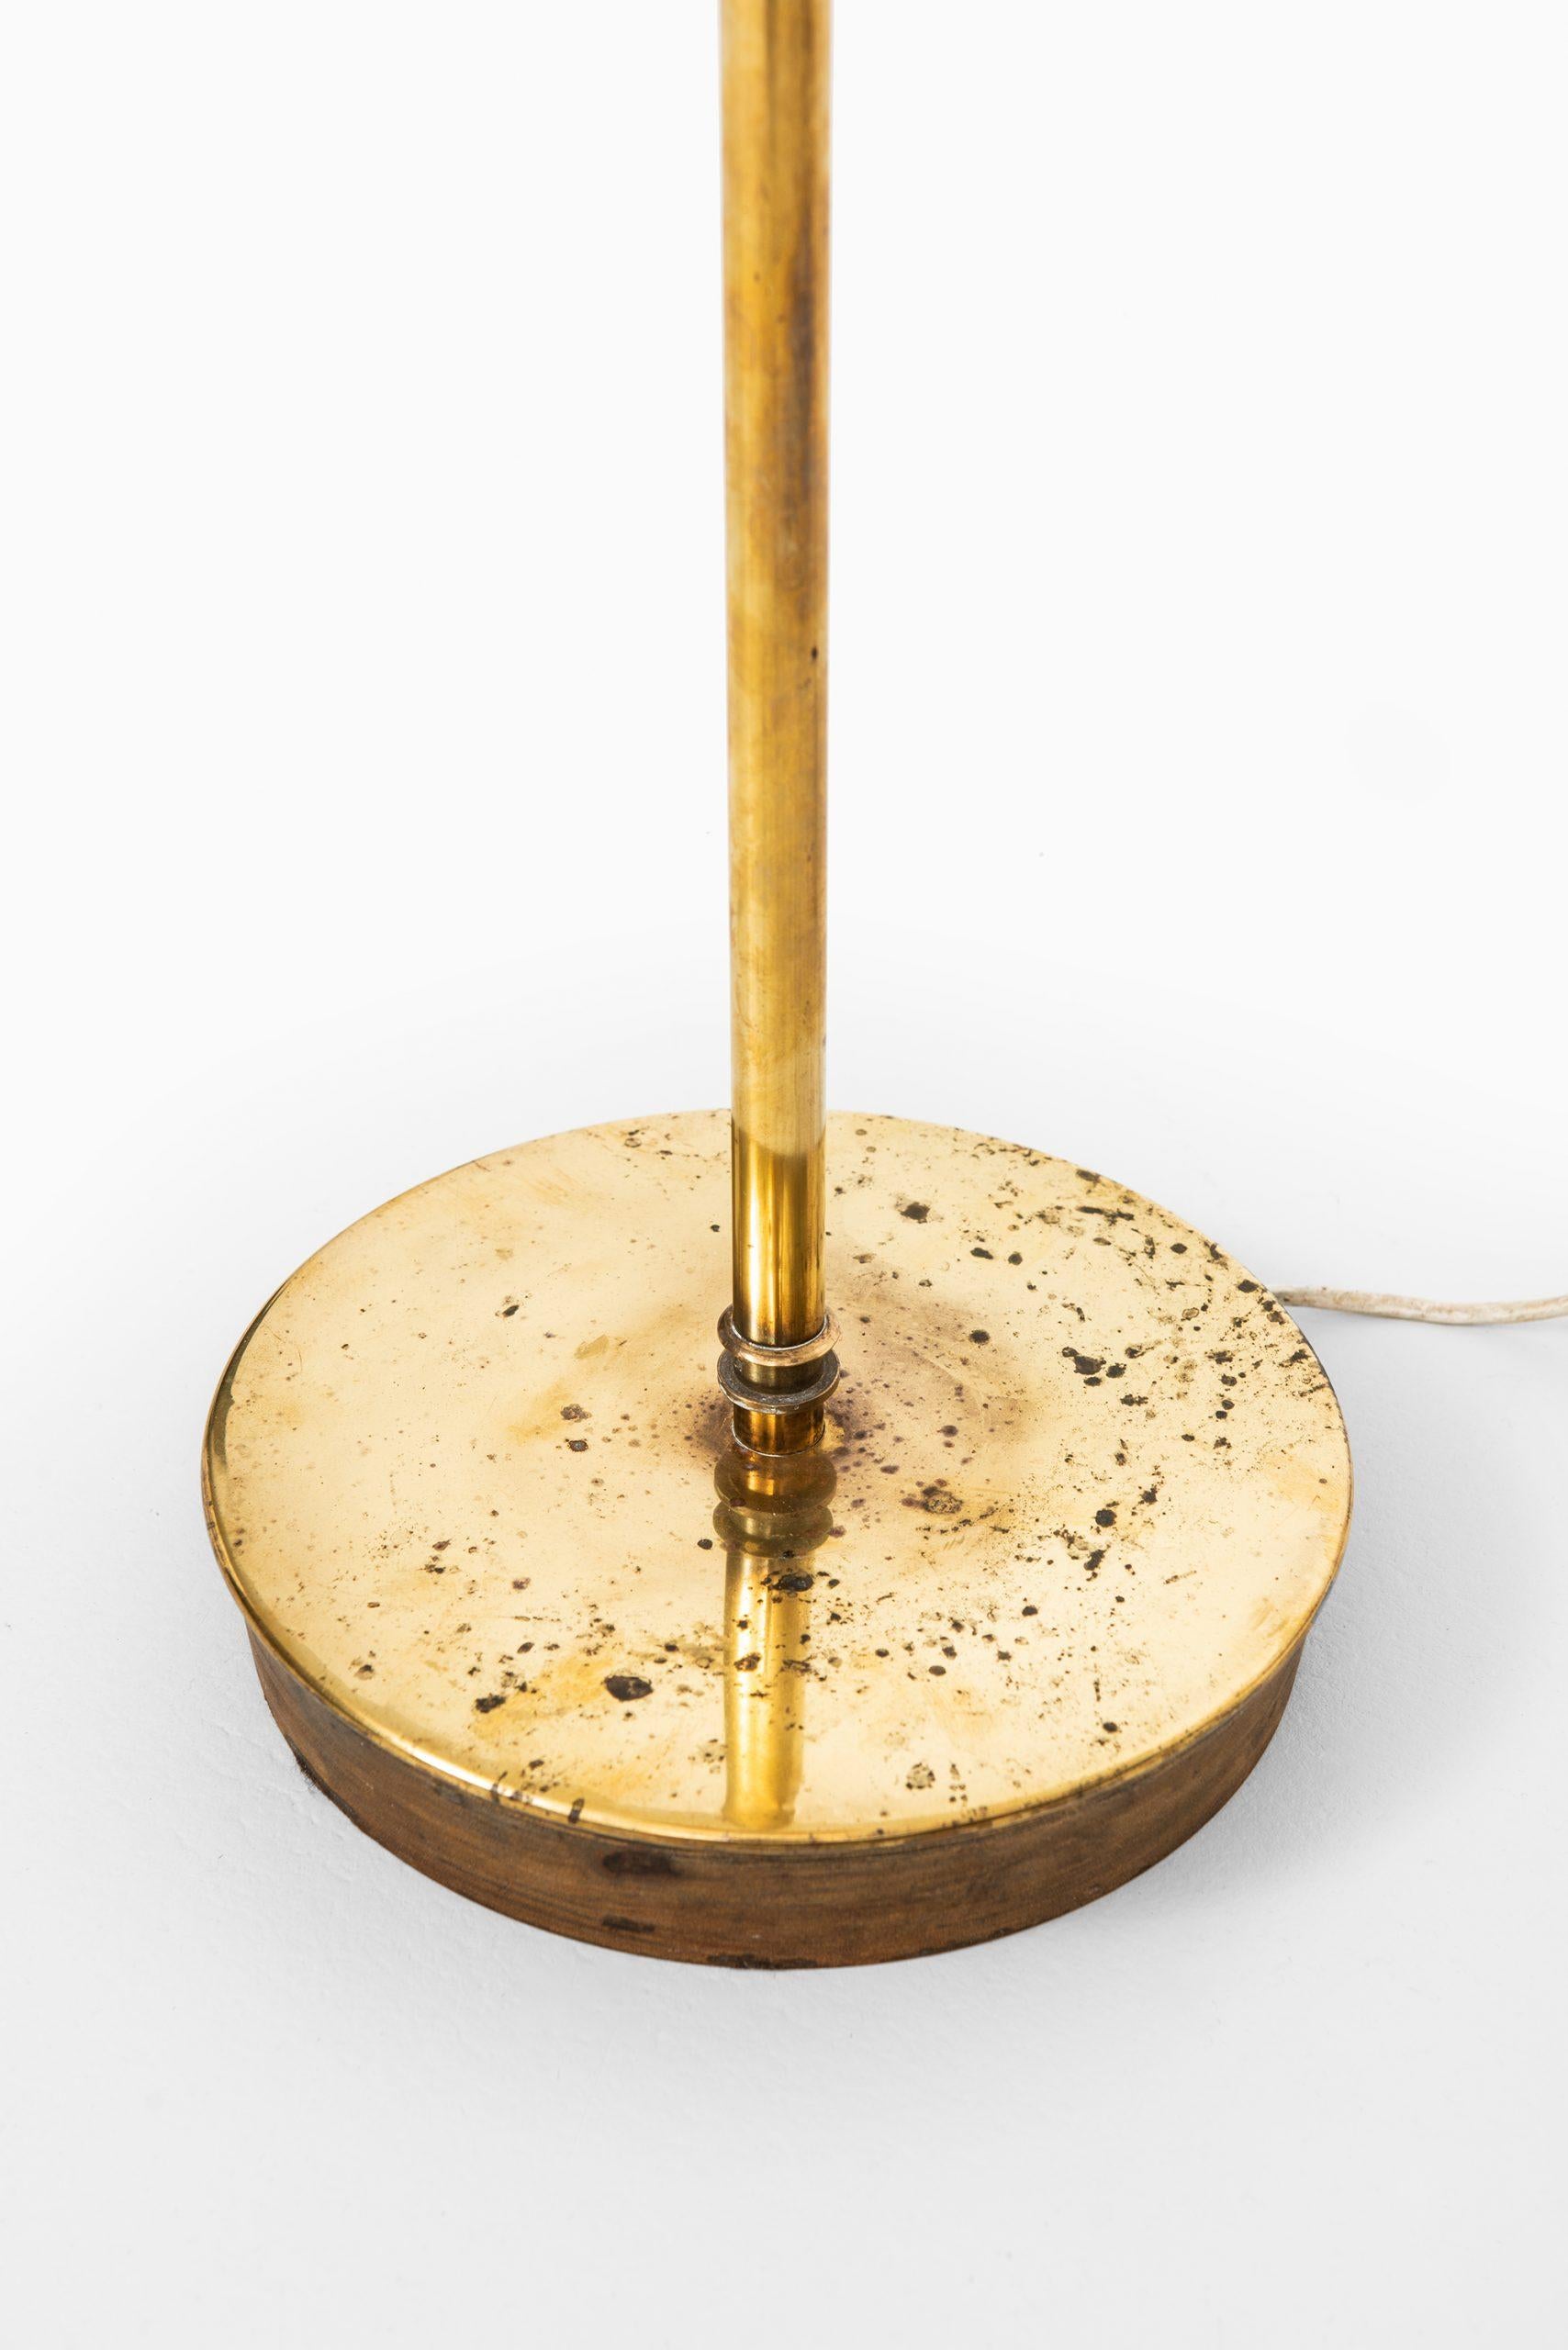 Finnish Floor Lamp Attributed to Paavo Tynell Produced in Finland